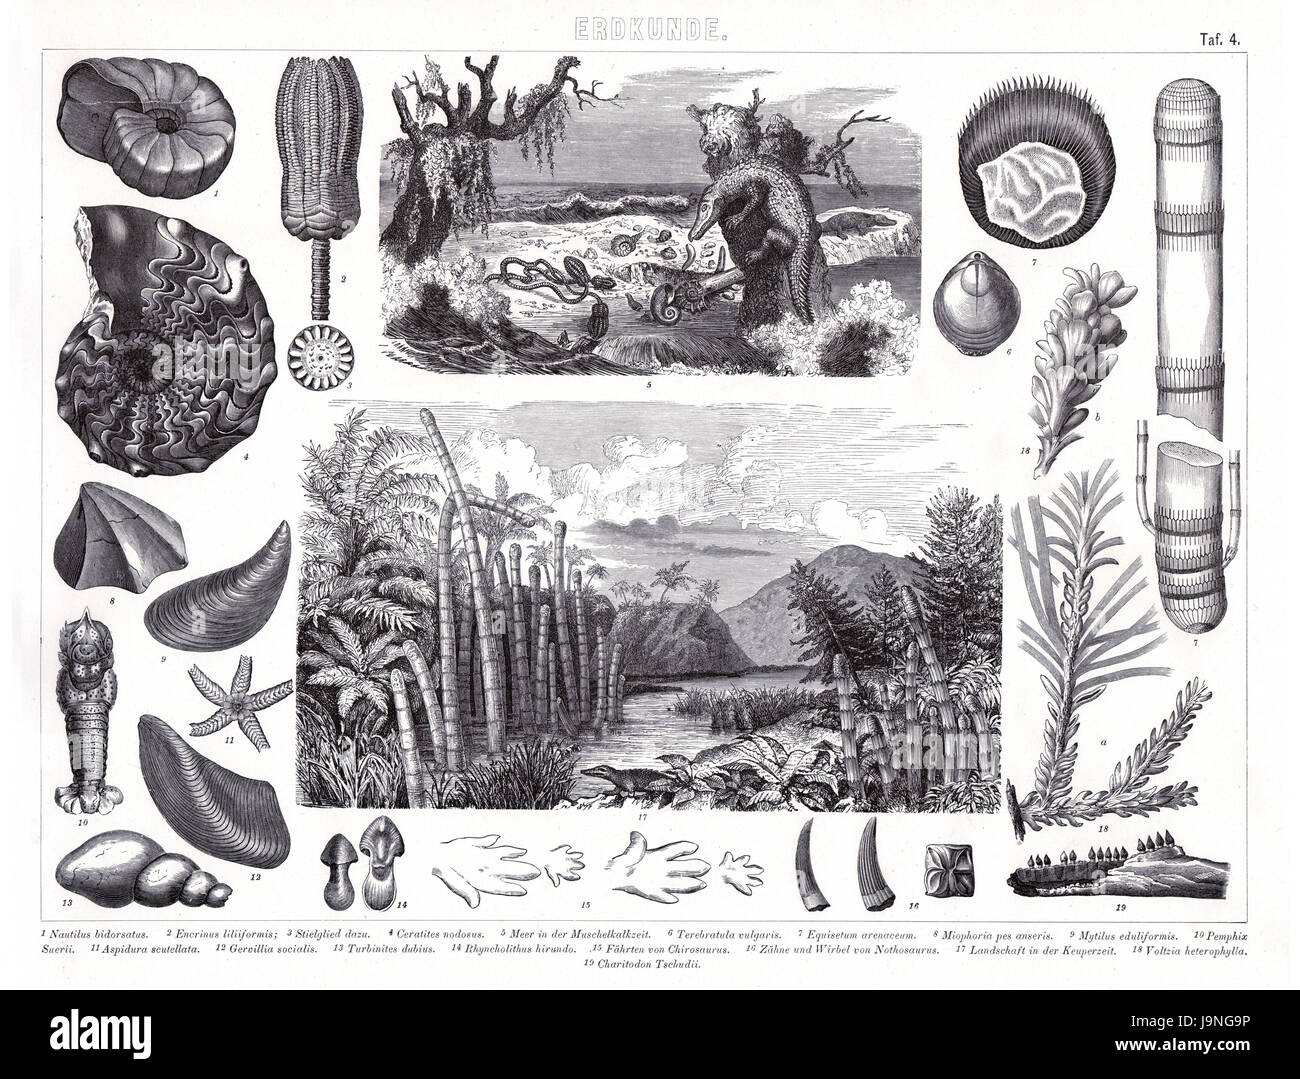 1874 Antique German Encyclopedia Atlas Print: Plant and Animals of the early earth geological periods, Cambrian, Jurassic and other. Stock Photo